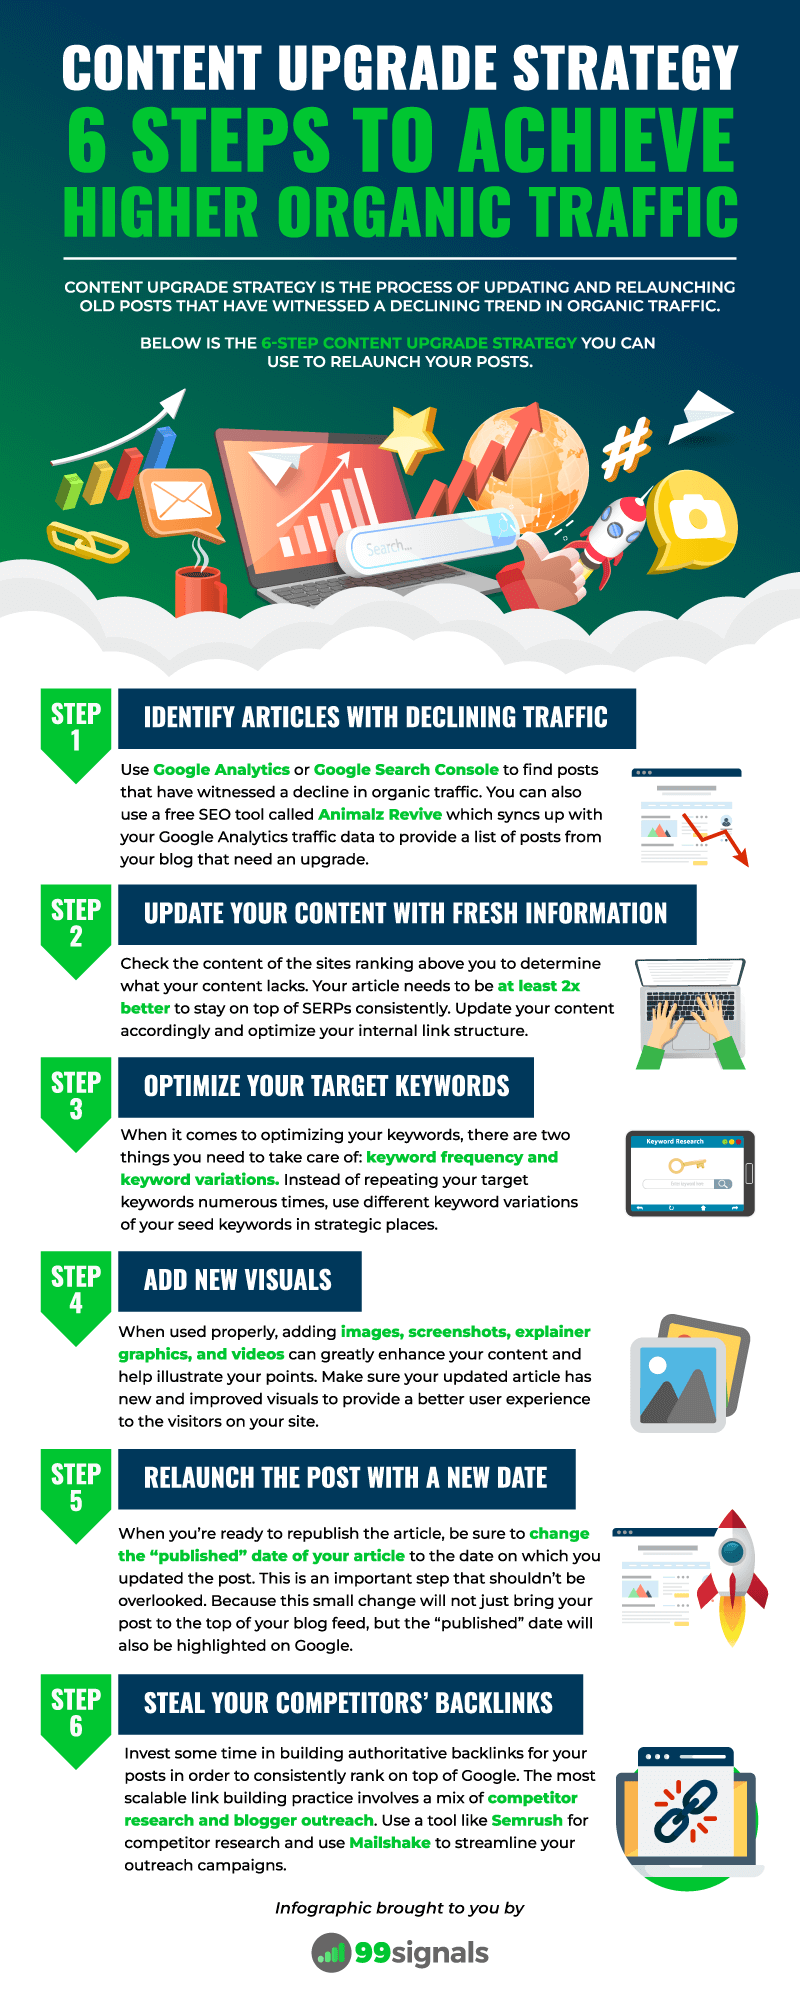 Content Upgrade Strategy Infographic by 99signals